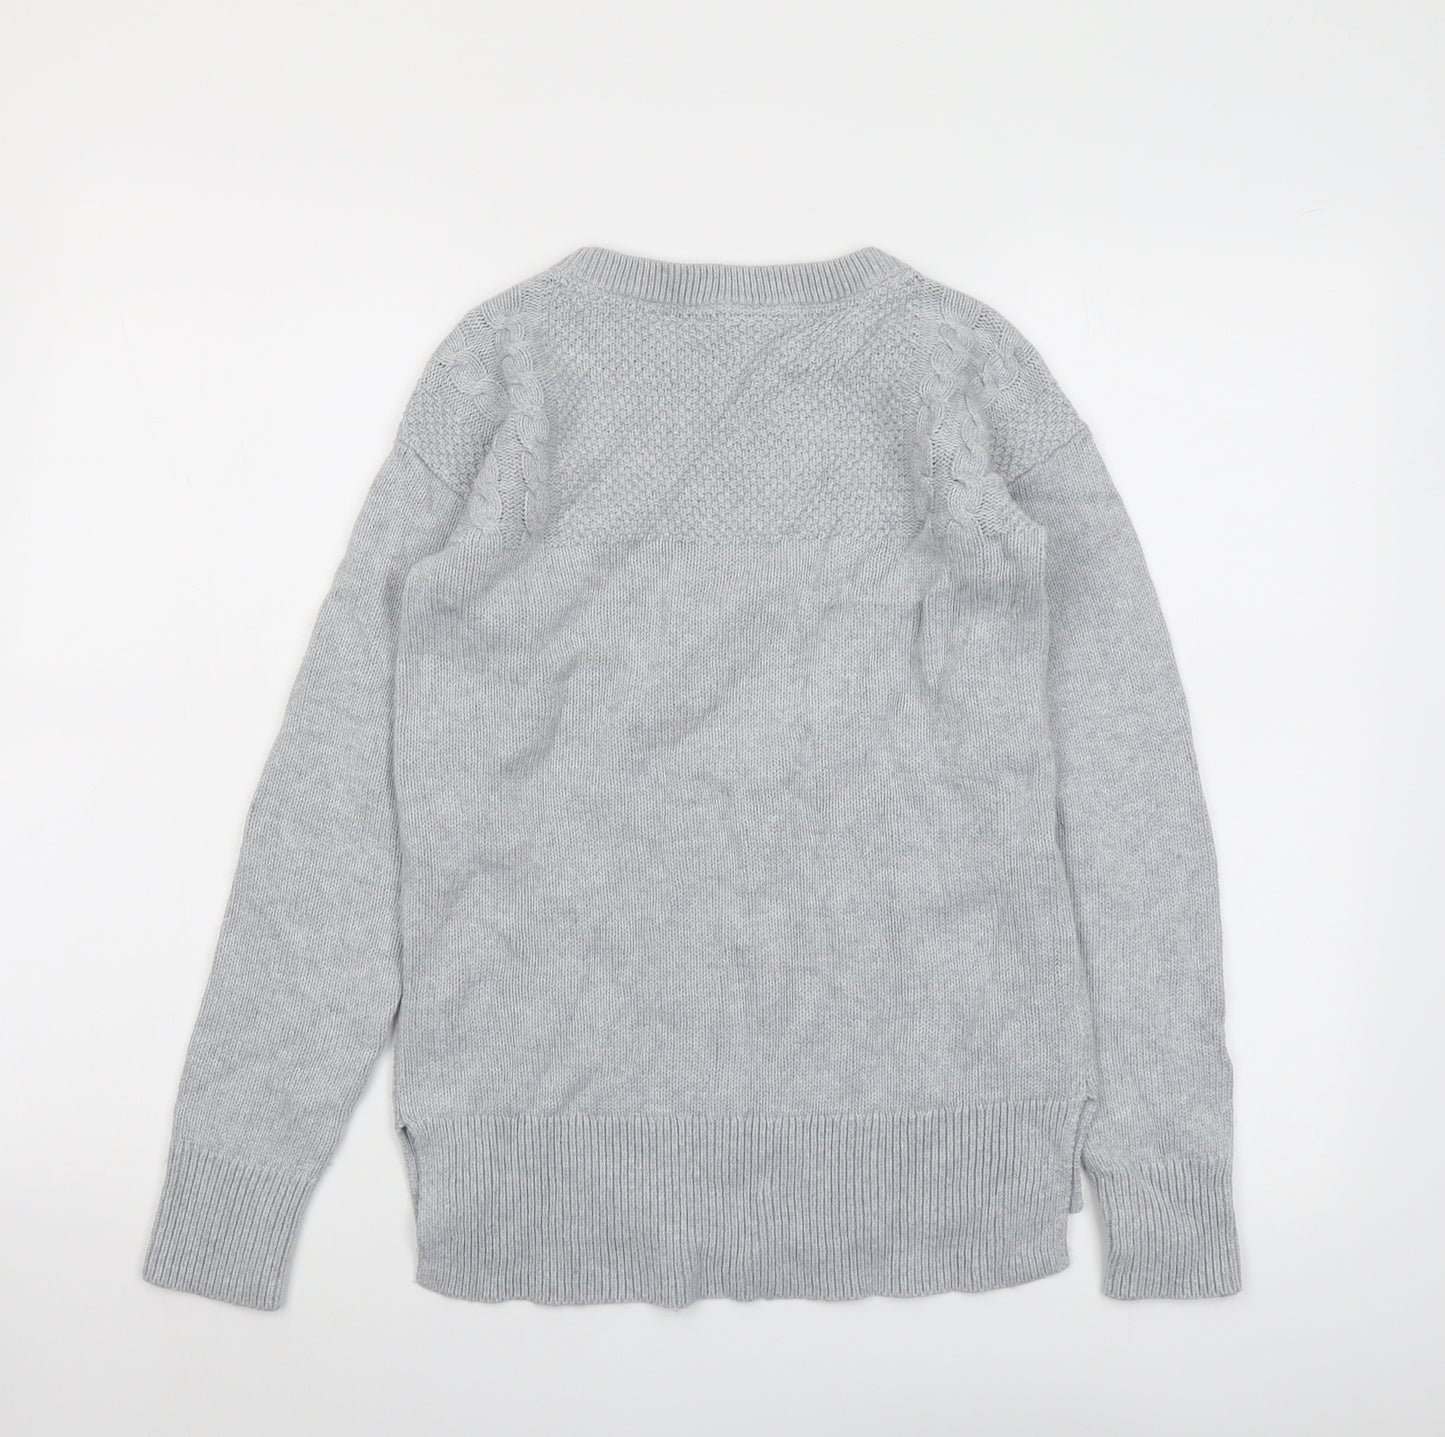 Crew Clothing Womens Grey Round Neck Cotton Pullover Jumper Size 6